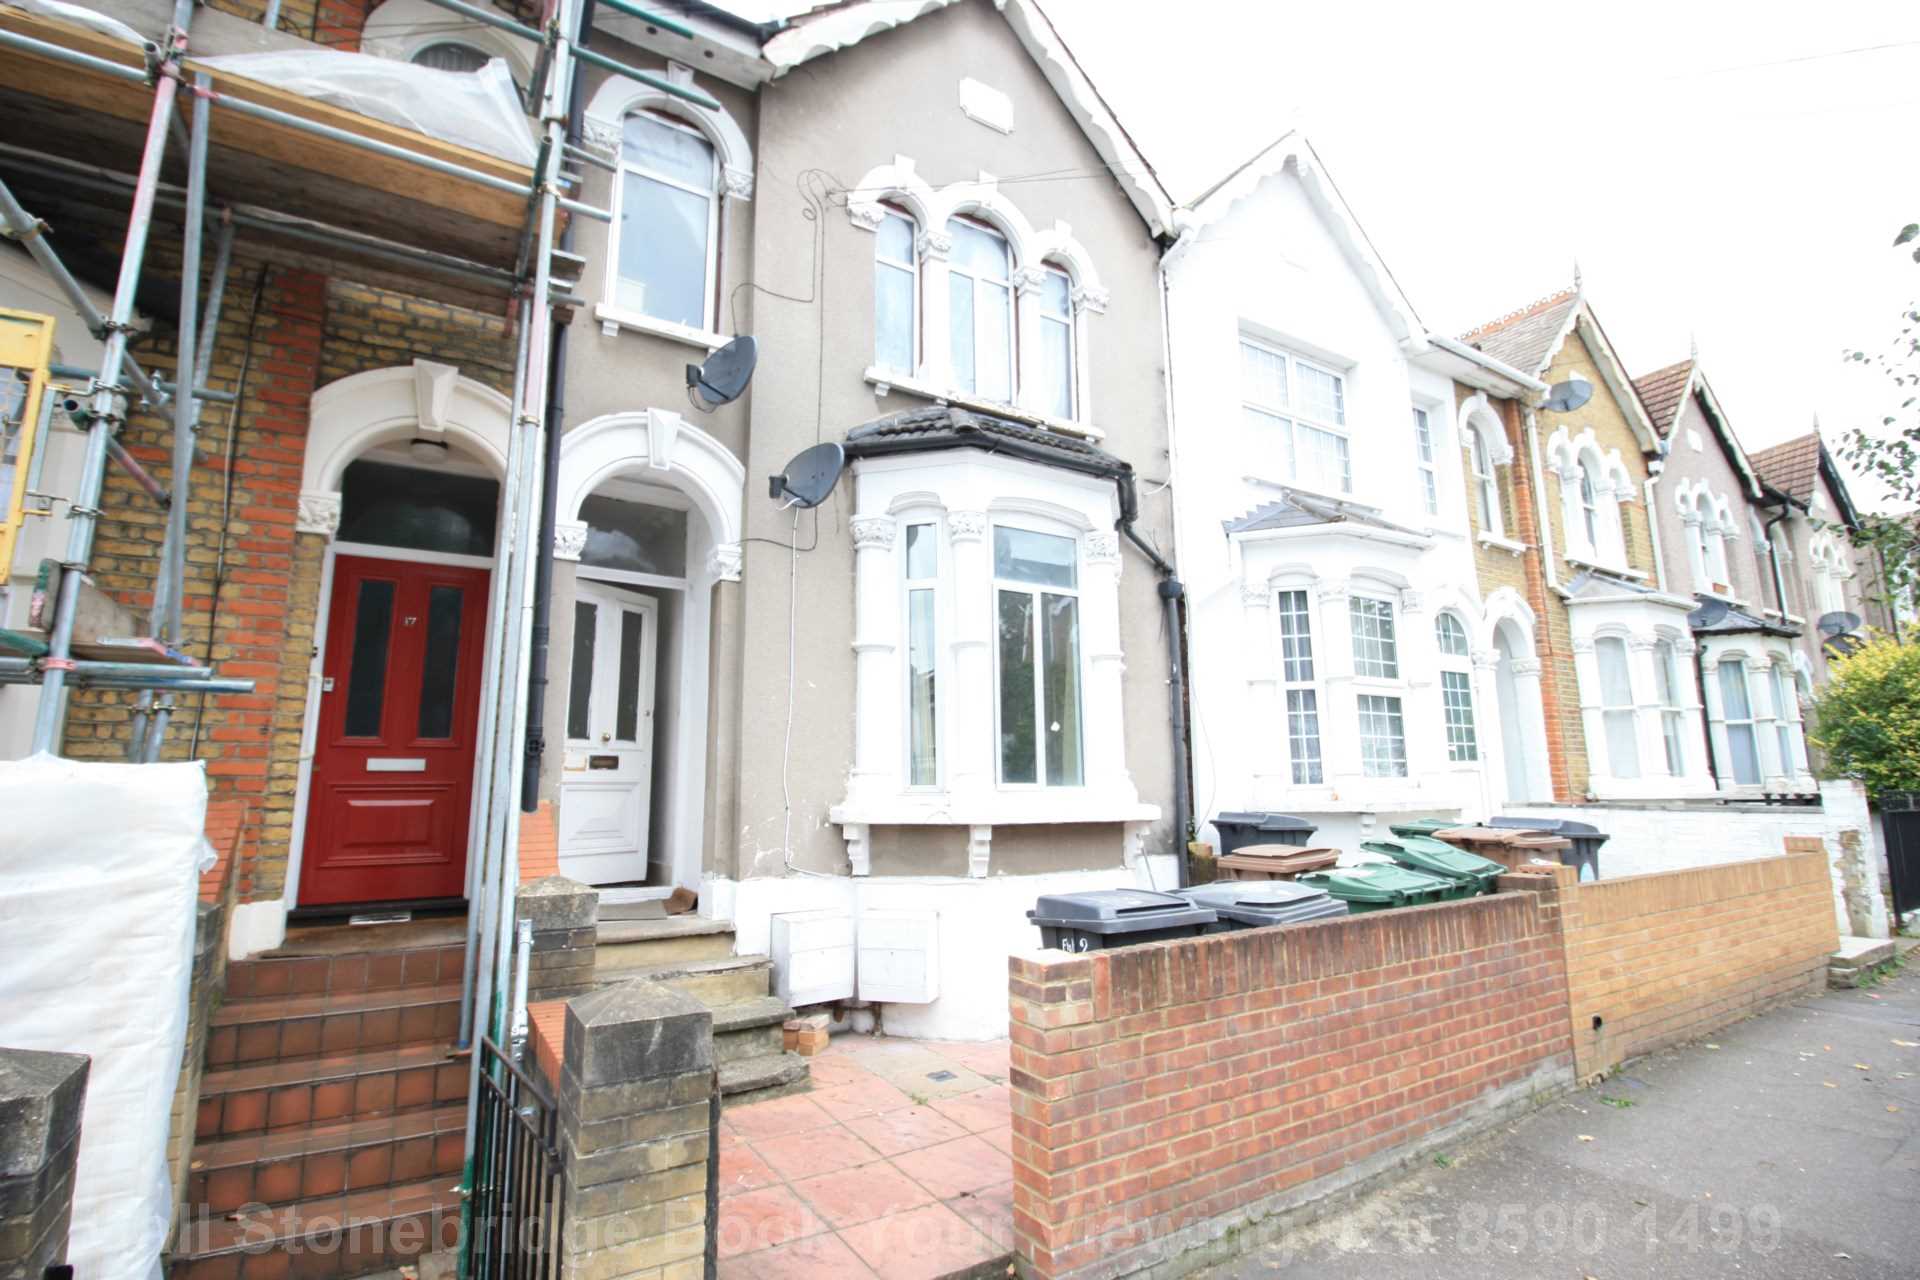 Stainforth Road, London, Image 1